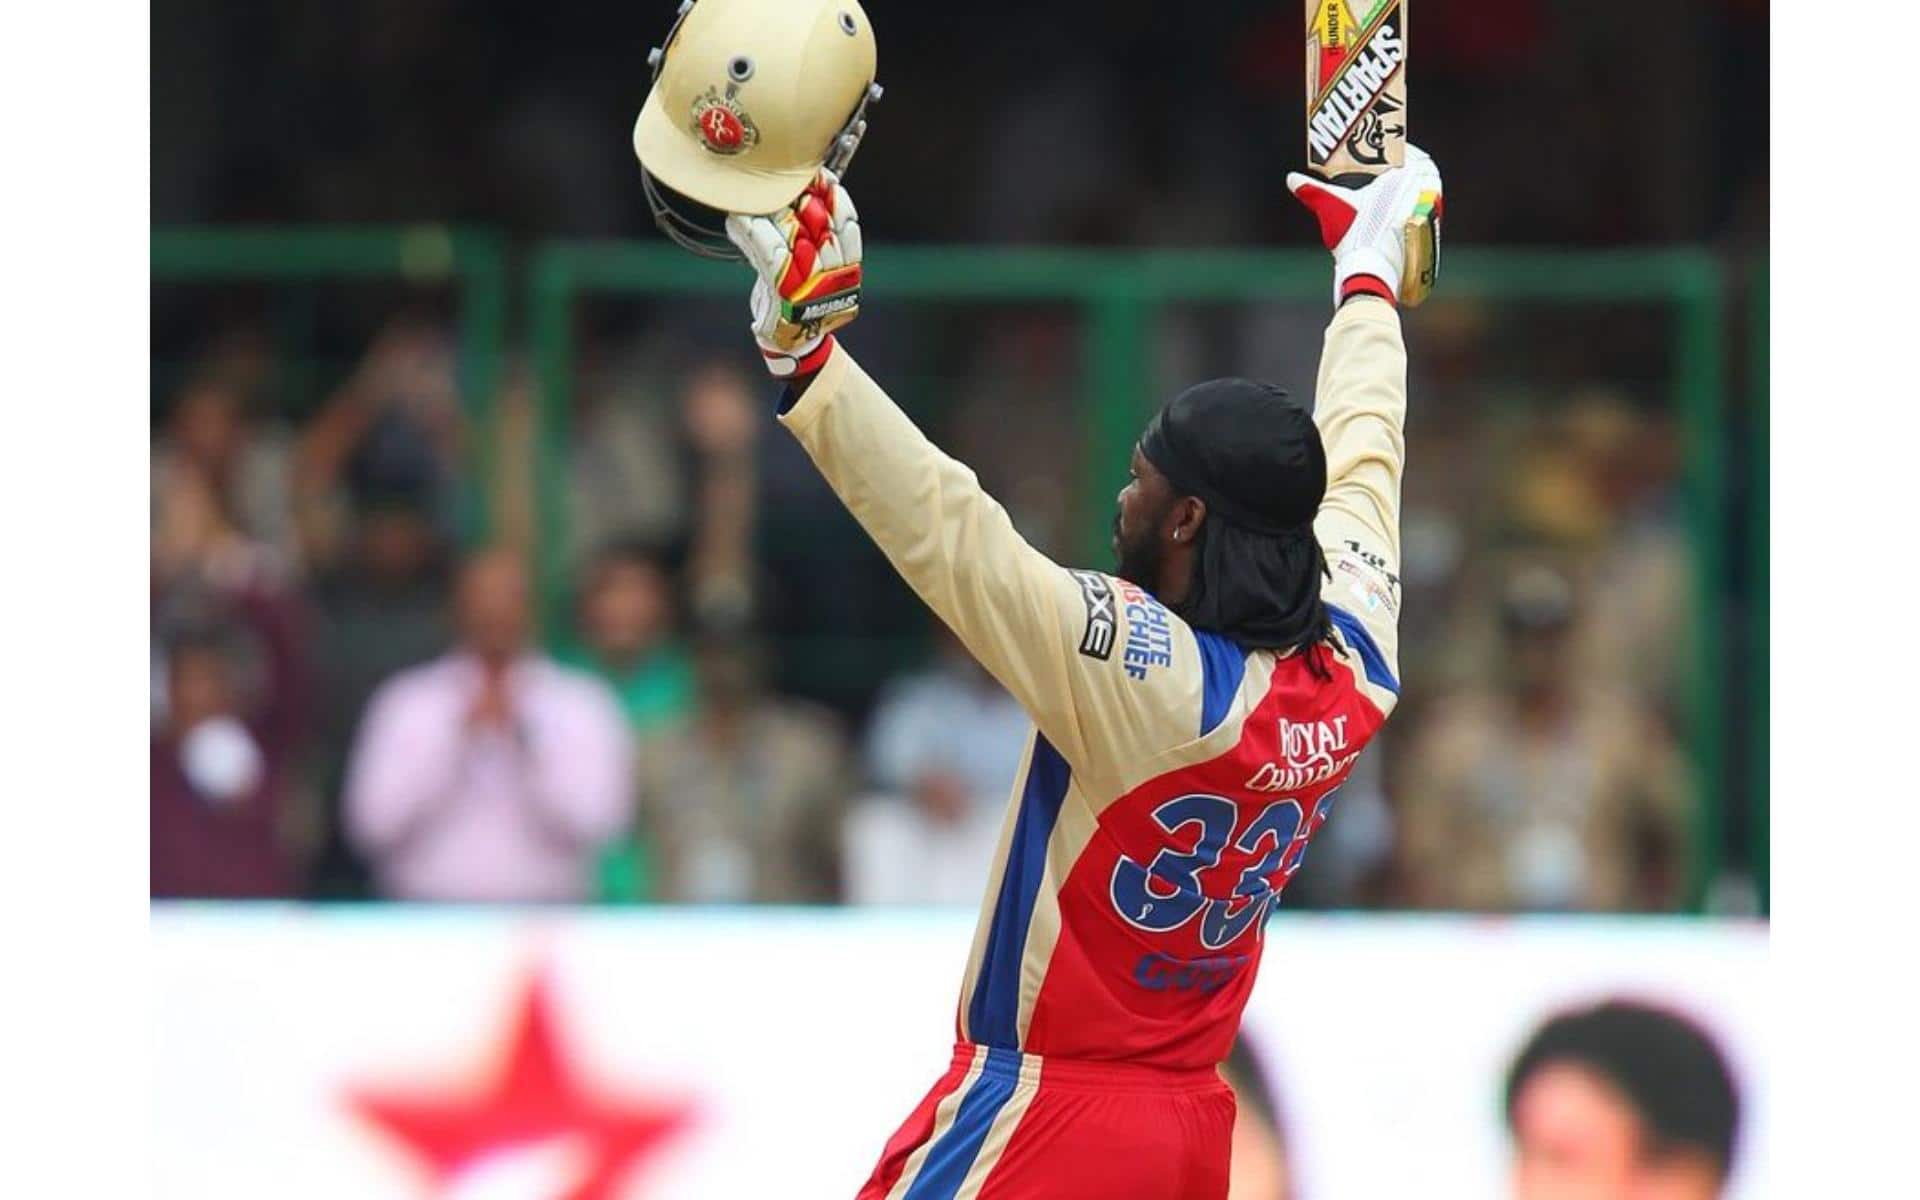 Gayle has hit the most sixes in an IPL innings [X]